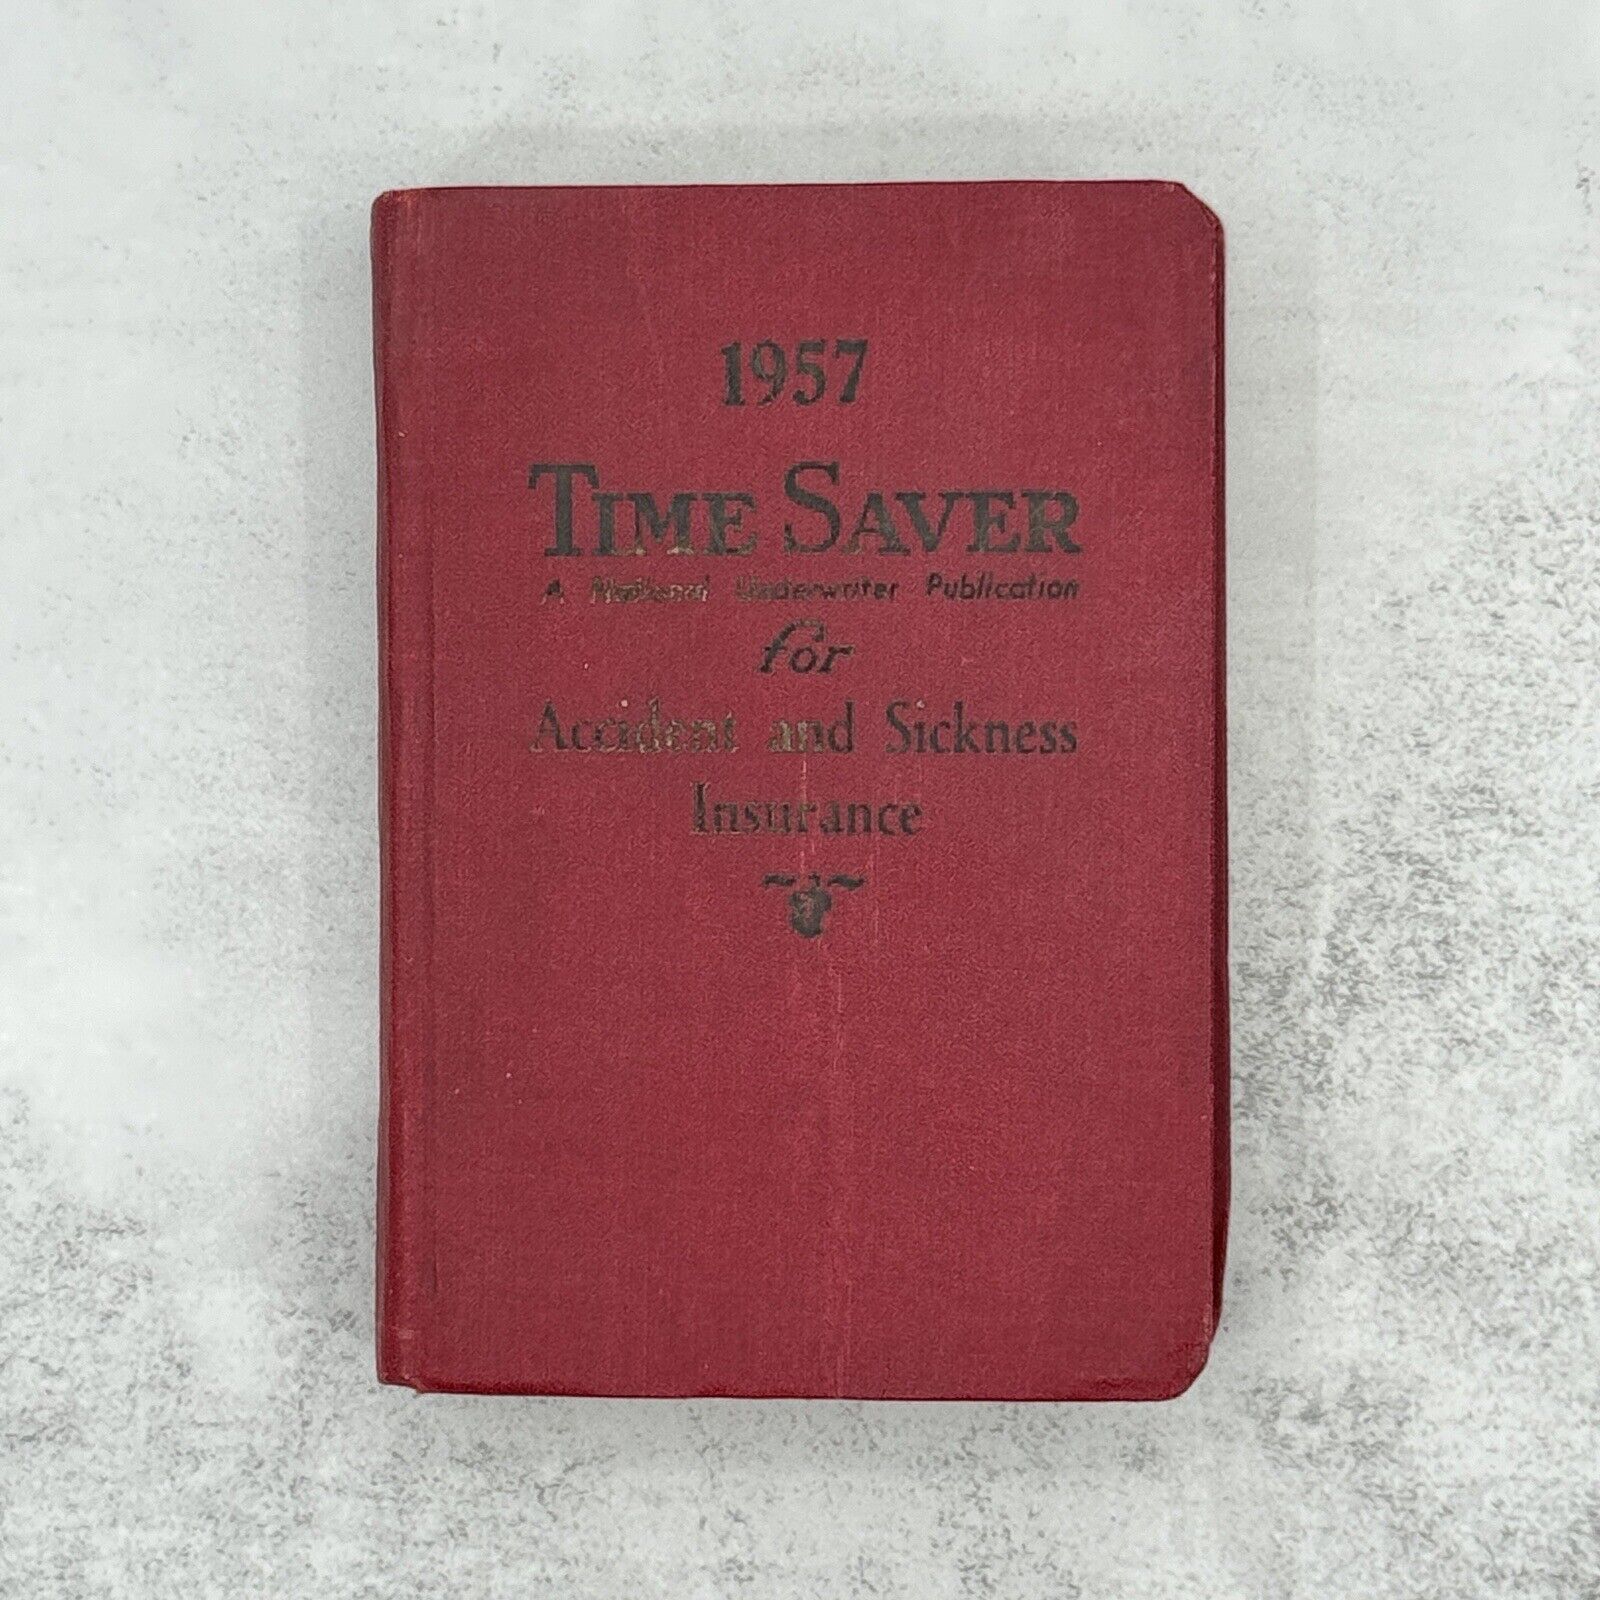 1957 Time Saver for Accident and Sickness Insurance Thirty-Fourth Annual Edition